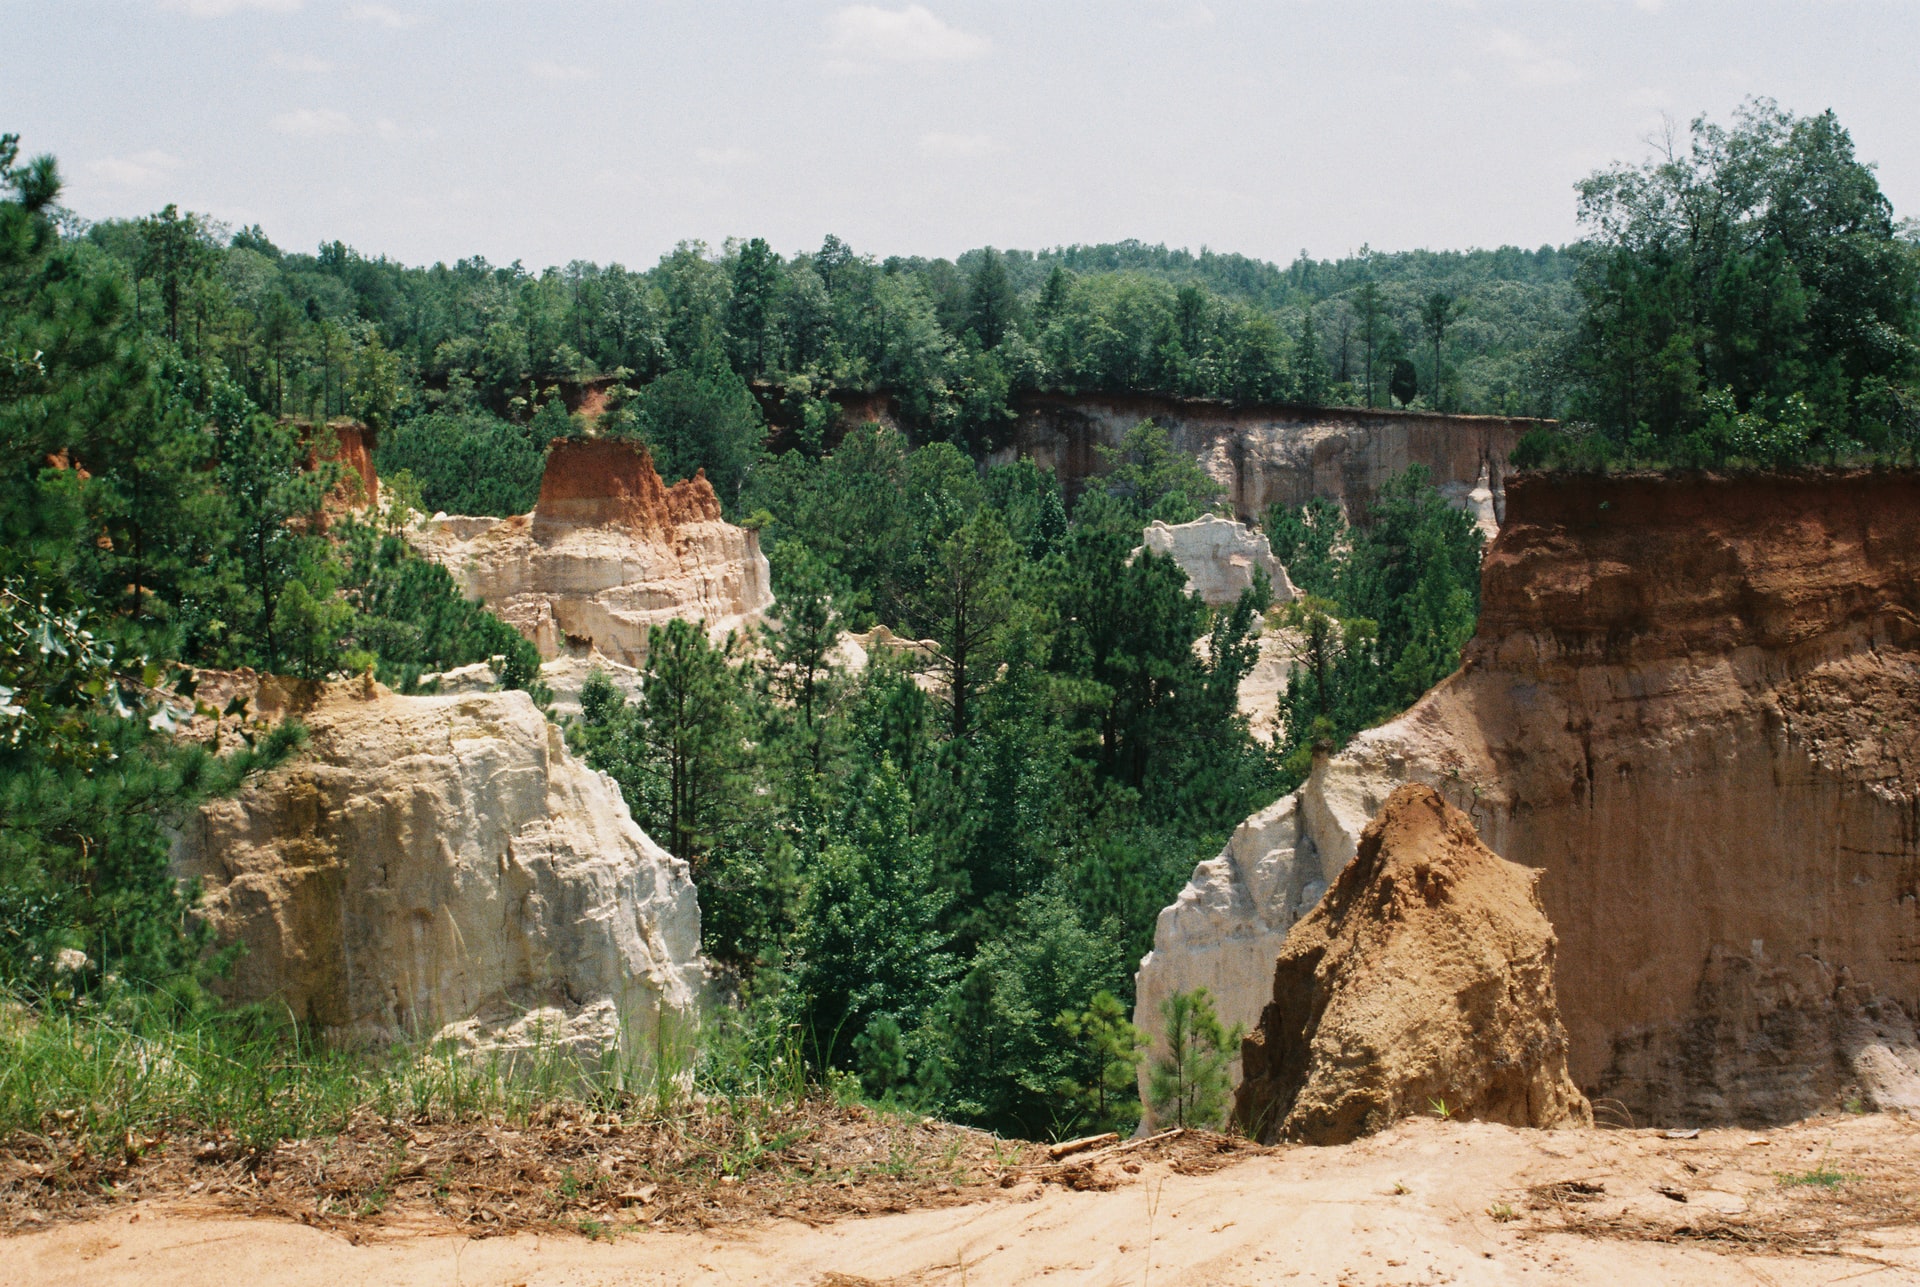 Providence Canyon in Georgia, which was formed by geological changes in the area